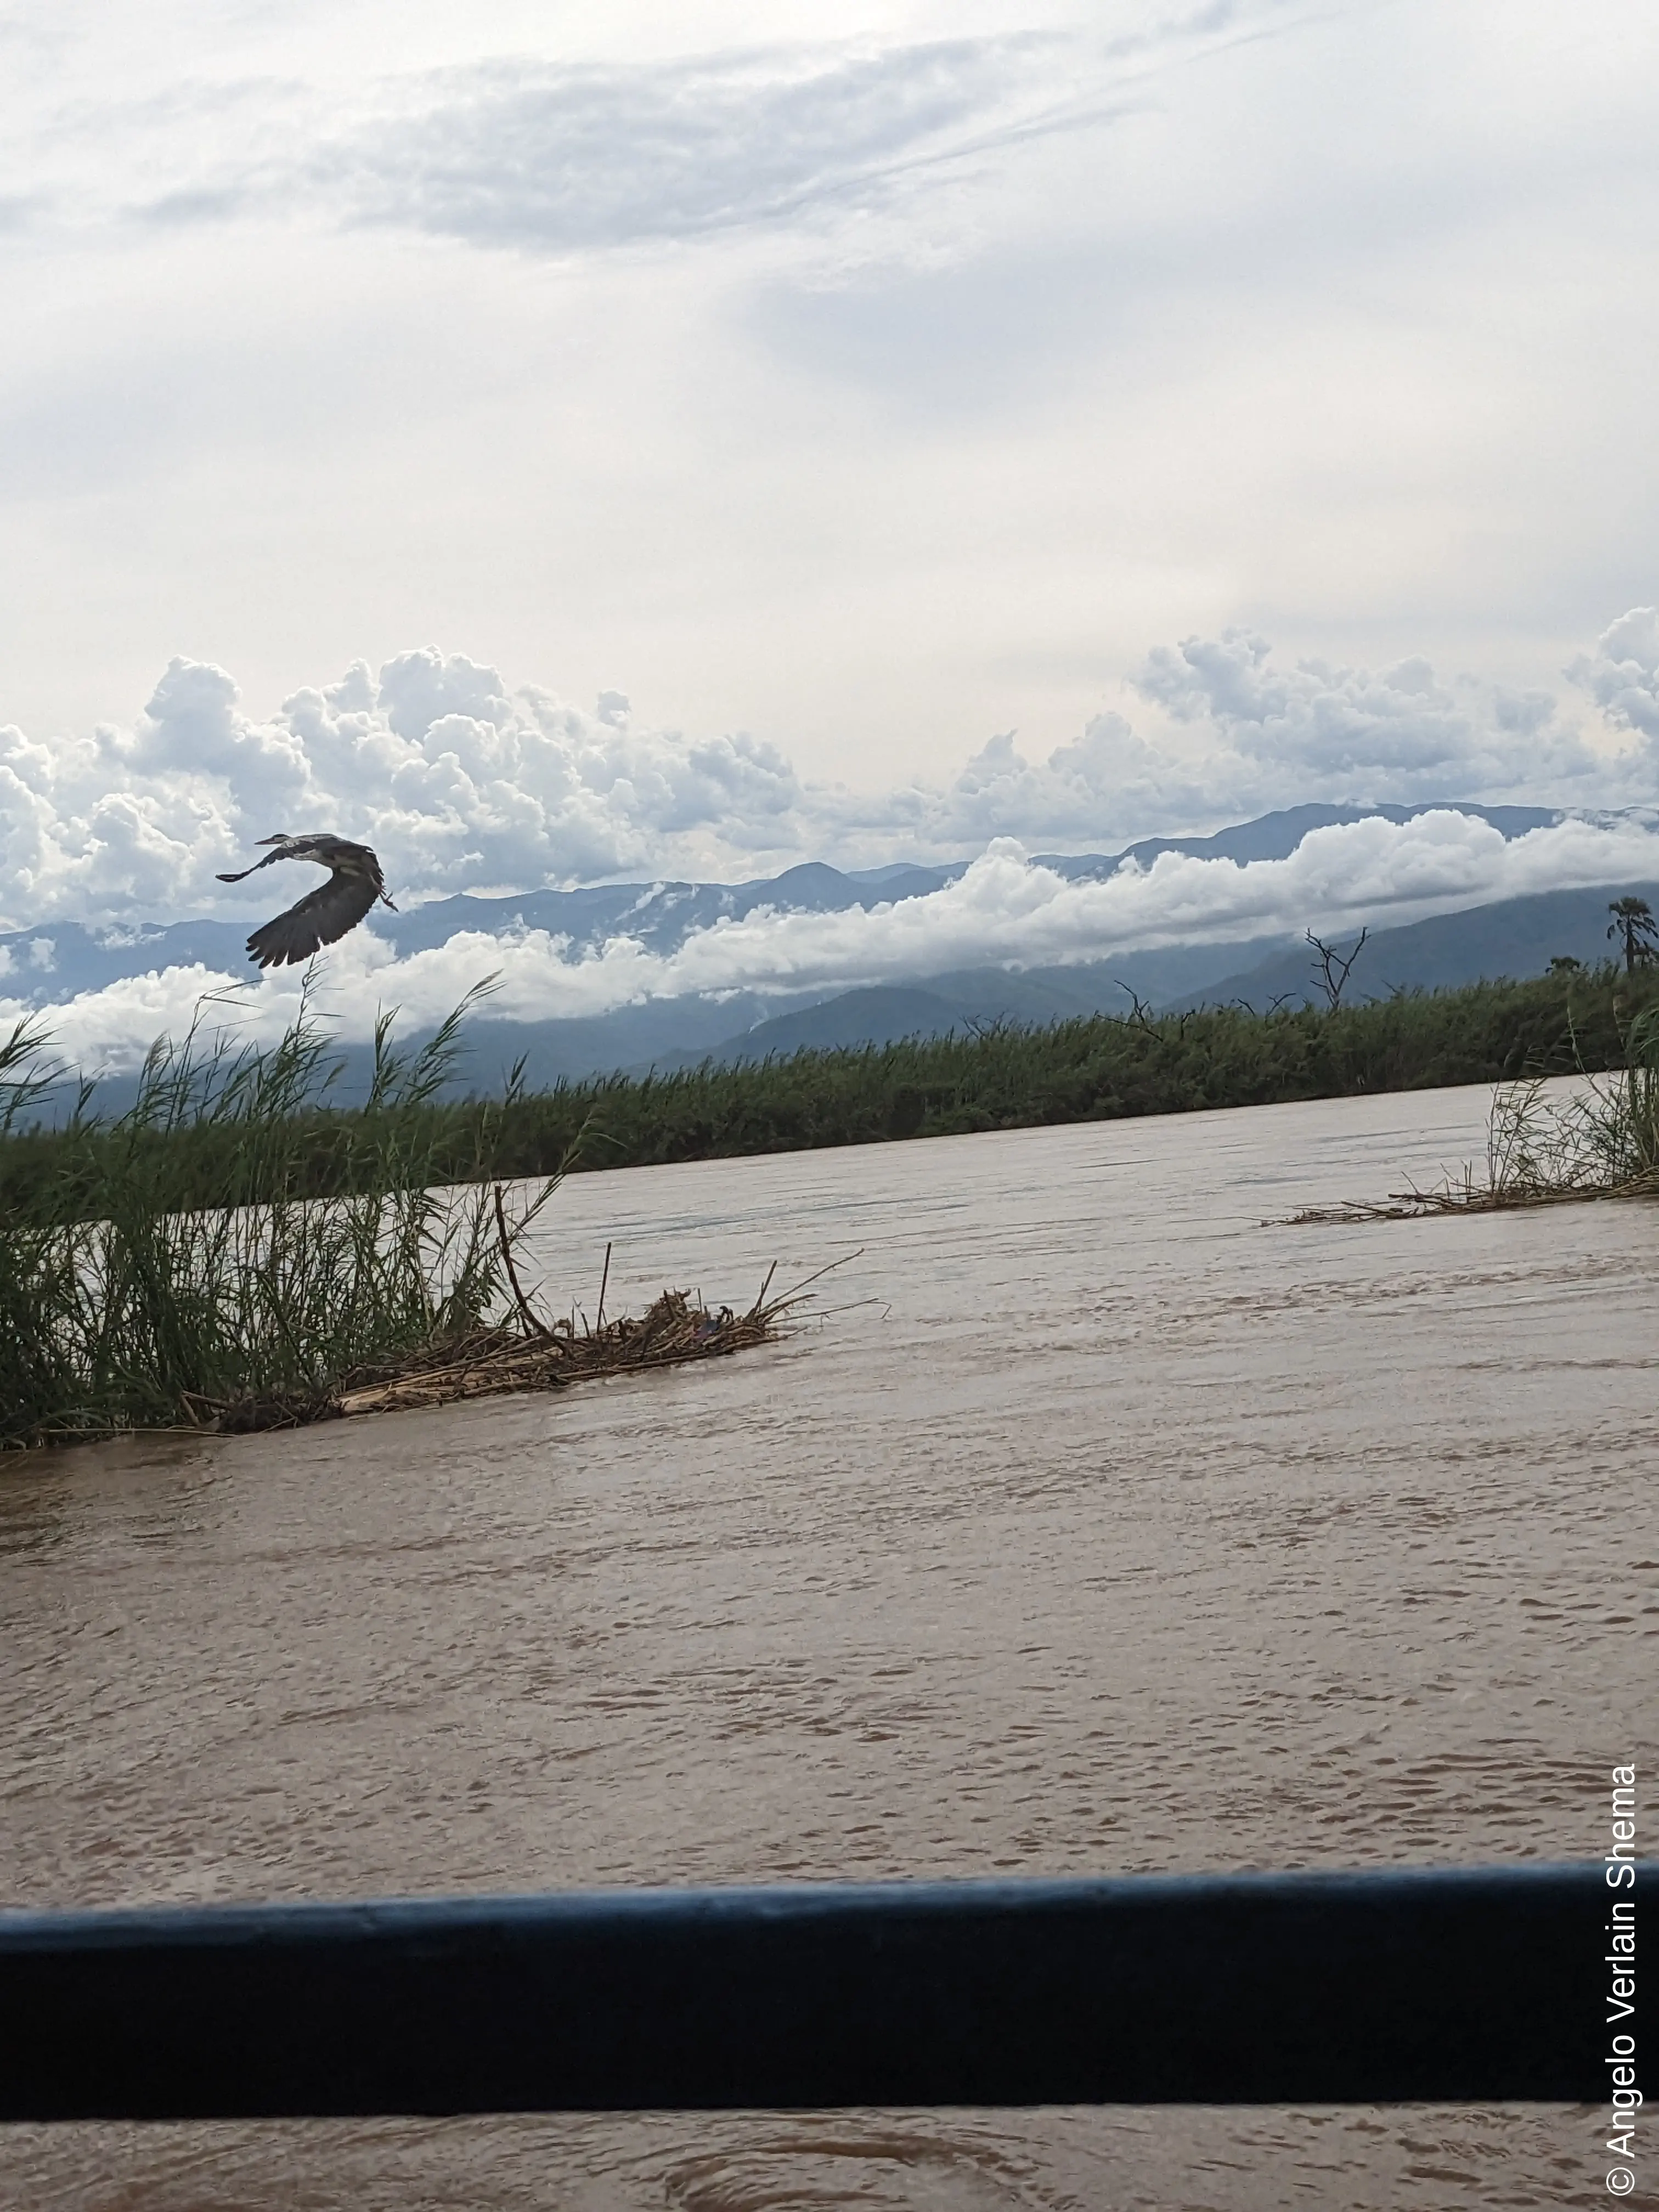 From the boat tour, we could see the swamp, some birds and the huge Congolese mountains tearing up the clouds